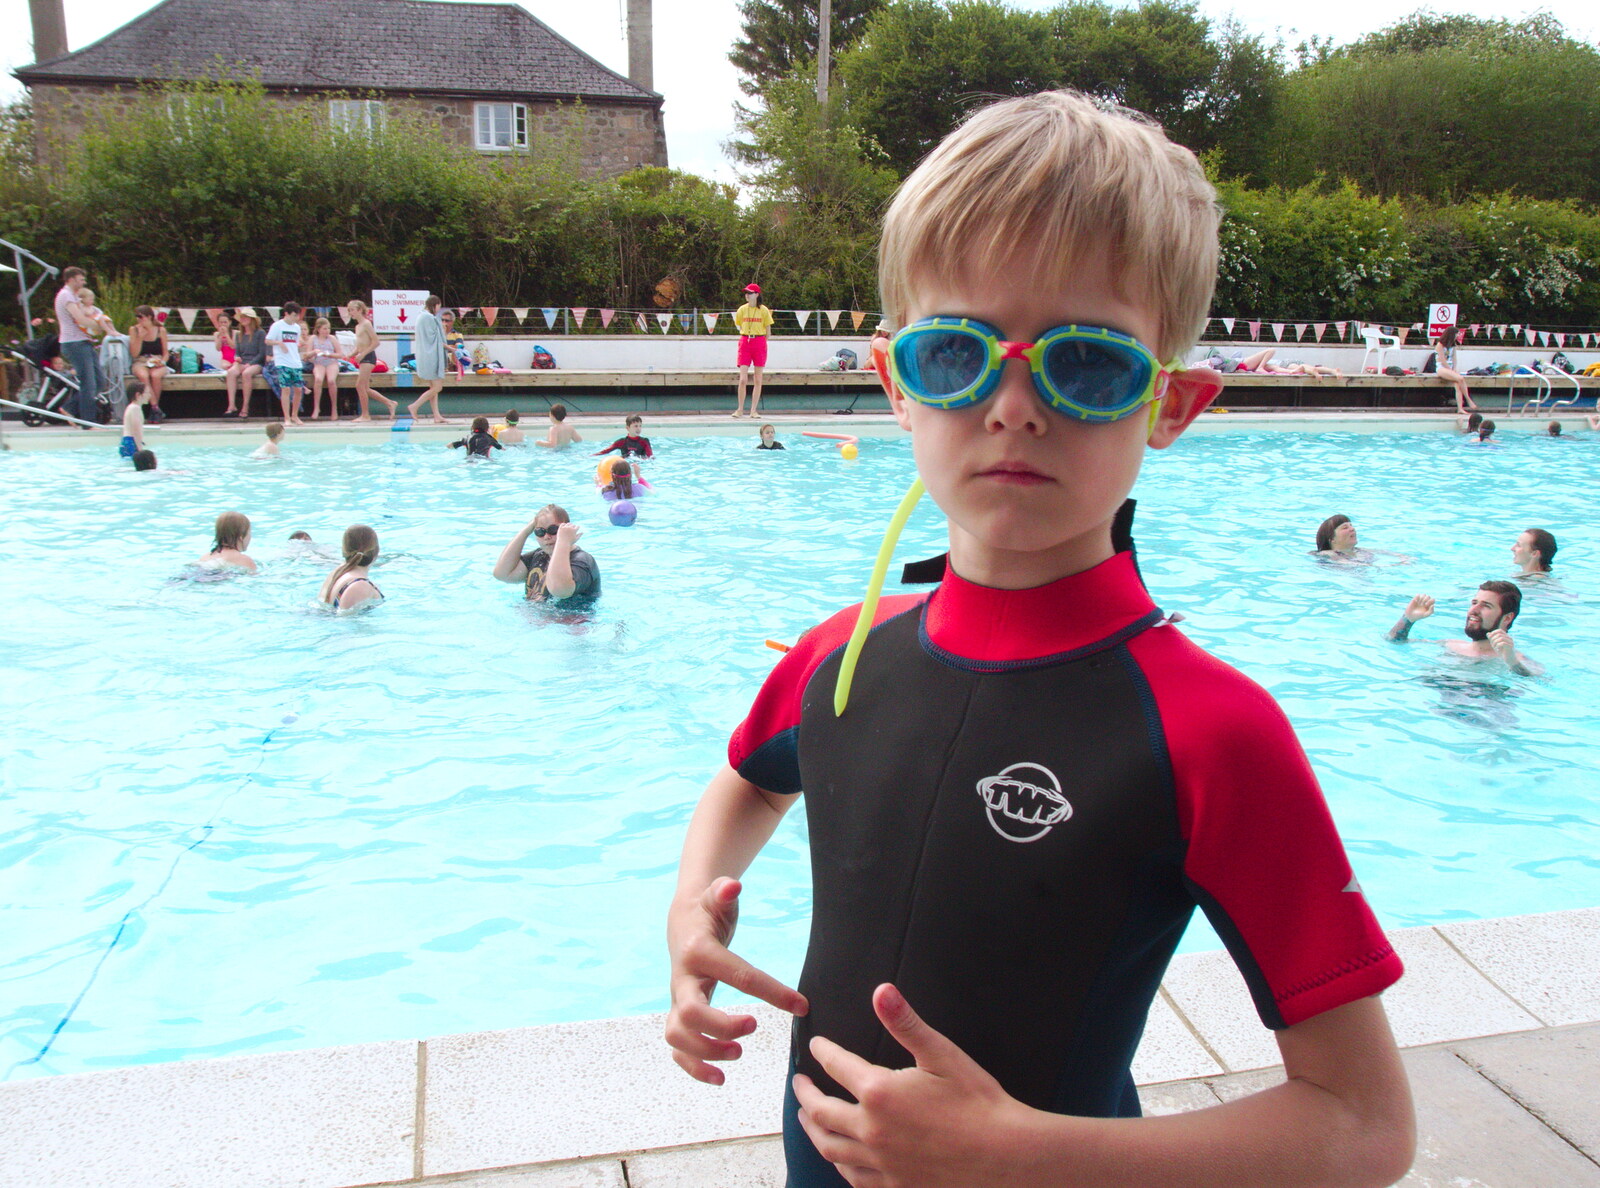 Chagford Lido and a Trip to Parke, Bovey Tracey, Devon - 25th May 2019: Harry stands by Chagford Lido